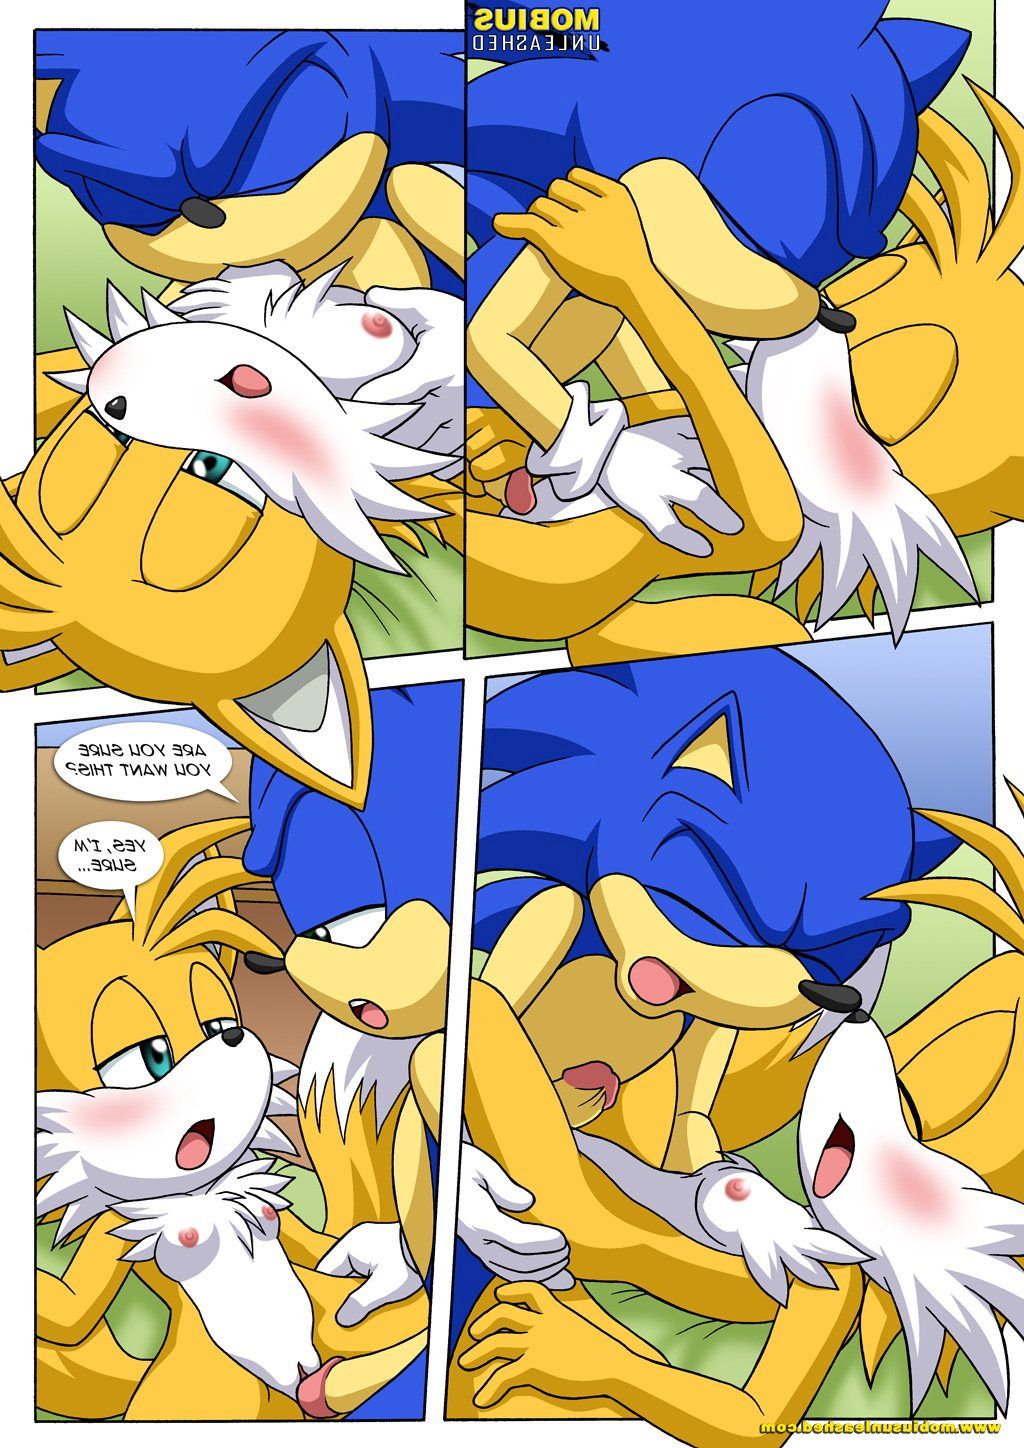 pal-comix-tails-tales image_13457.jpg